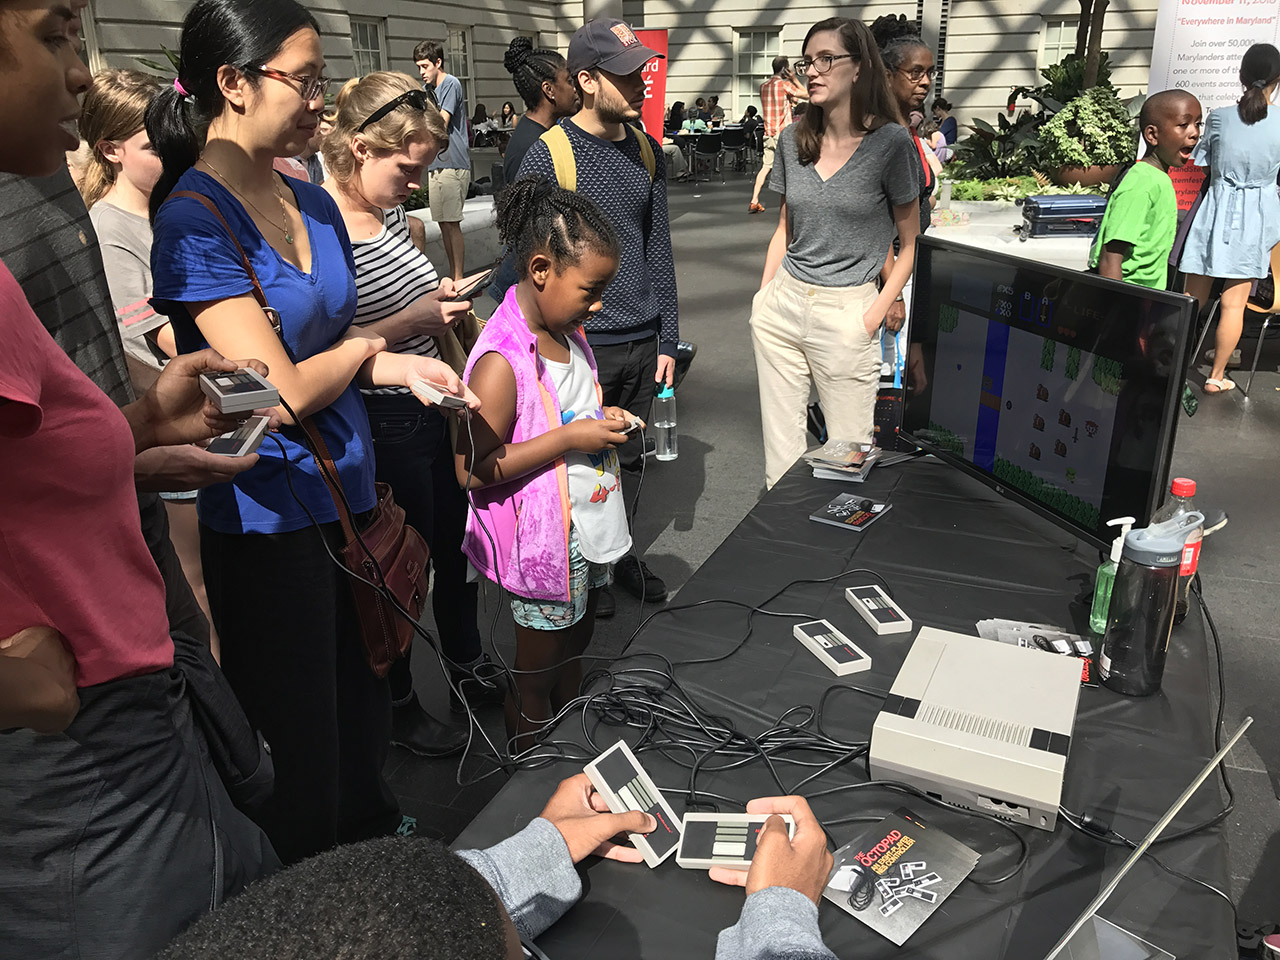 A group of people playing together at the Smithsonian Museum of American Art's annual arcade in DC.